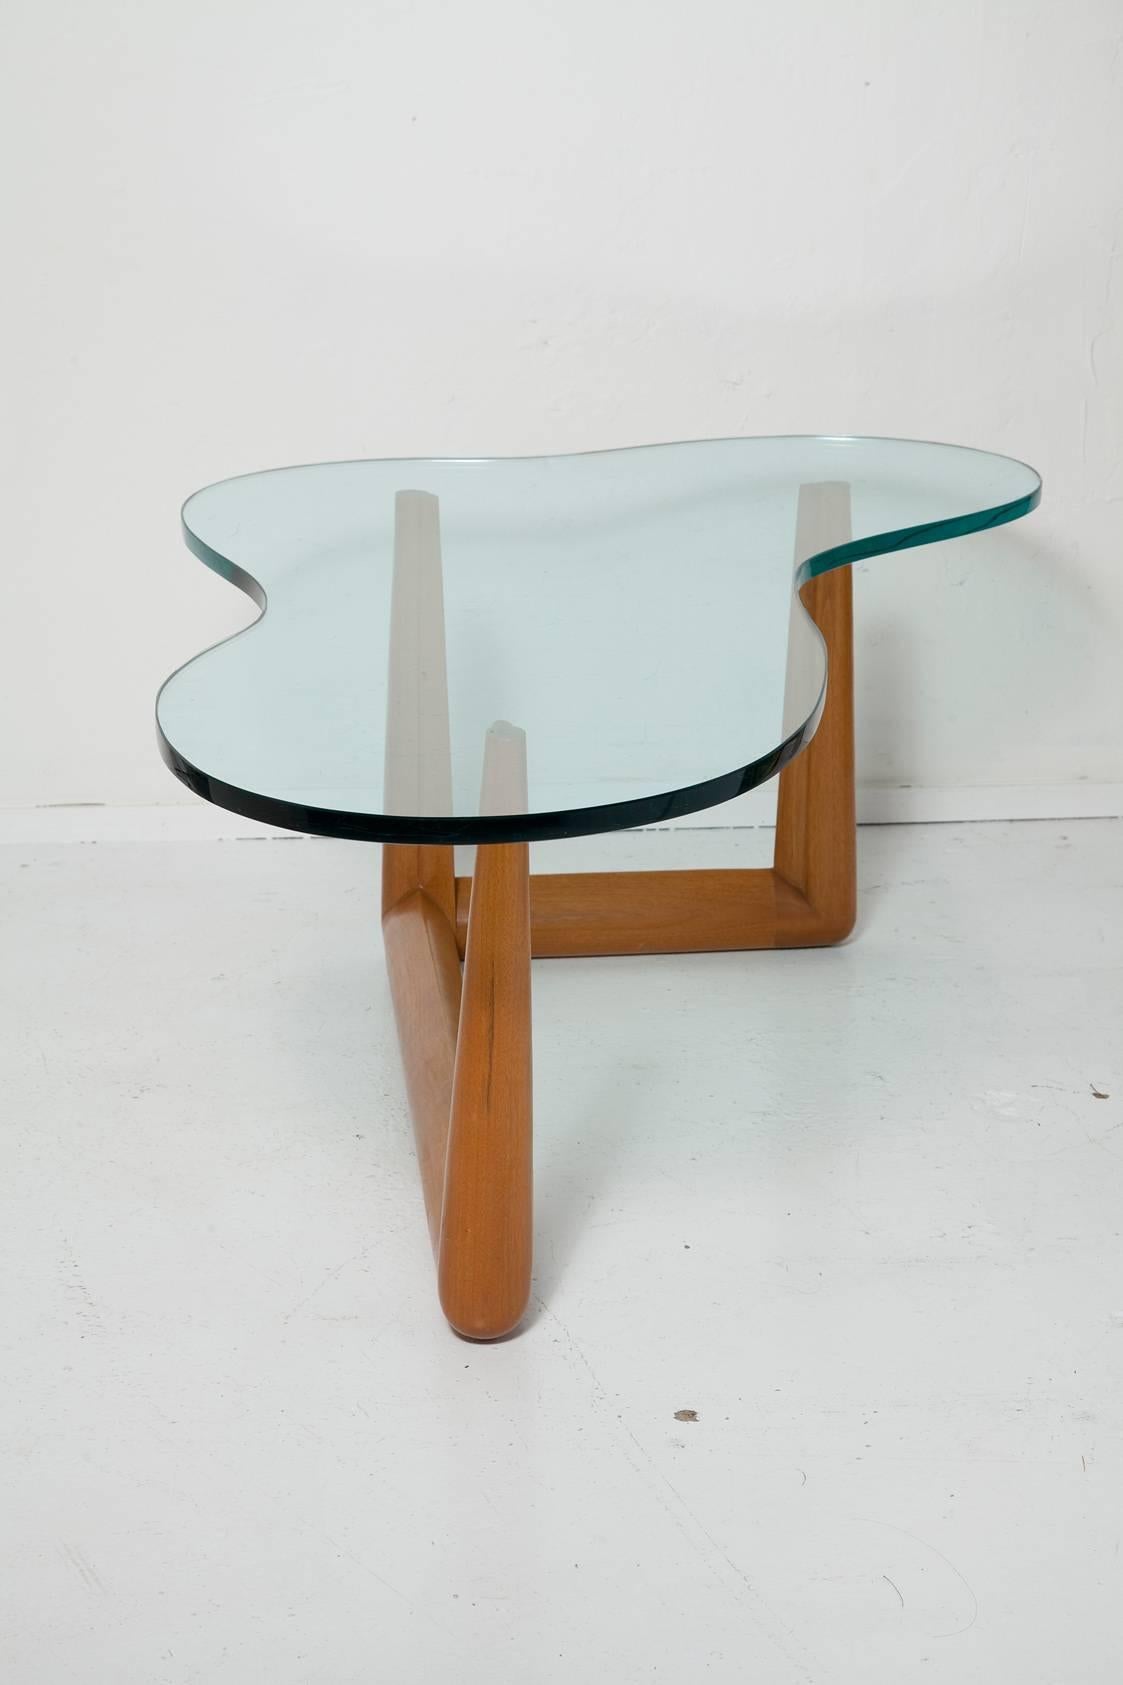 Timeless, Classic Mid-Century Modern biomorphic coffee table By T.H. Robsjohn-Gibbings For Widdicomb with gorgeous original green glass top.